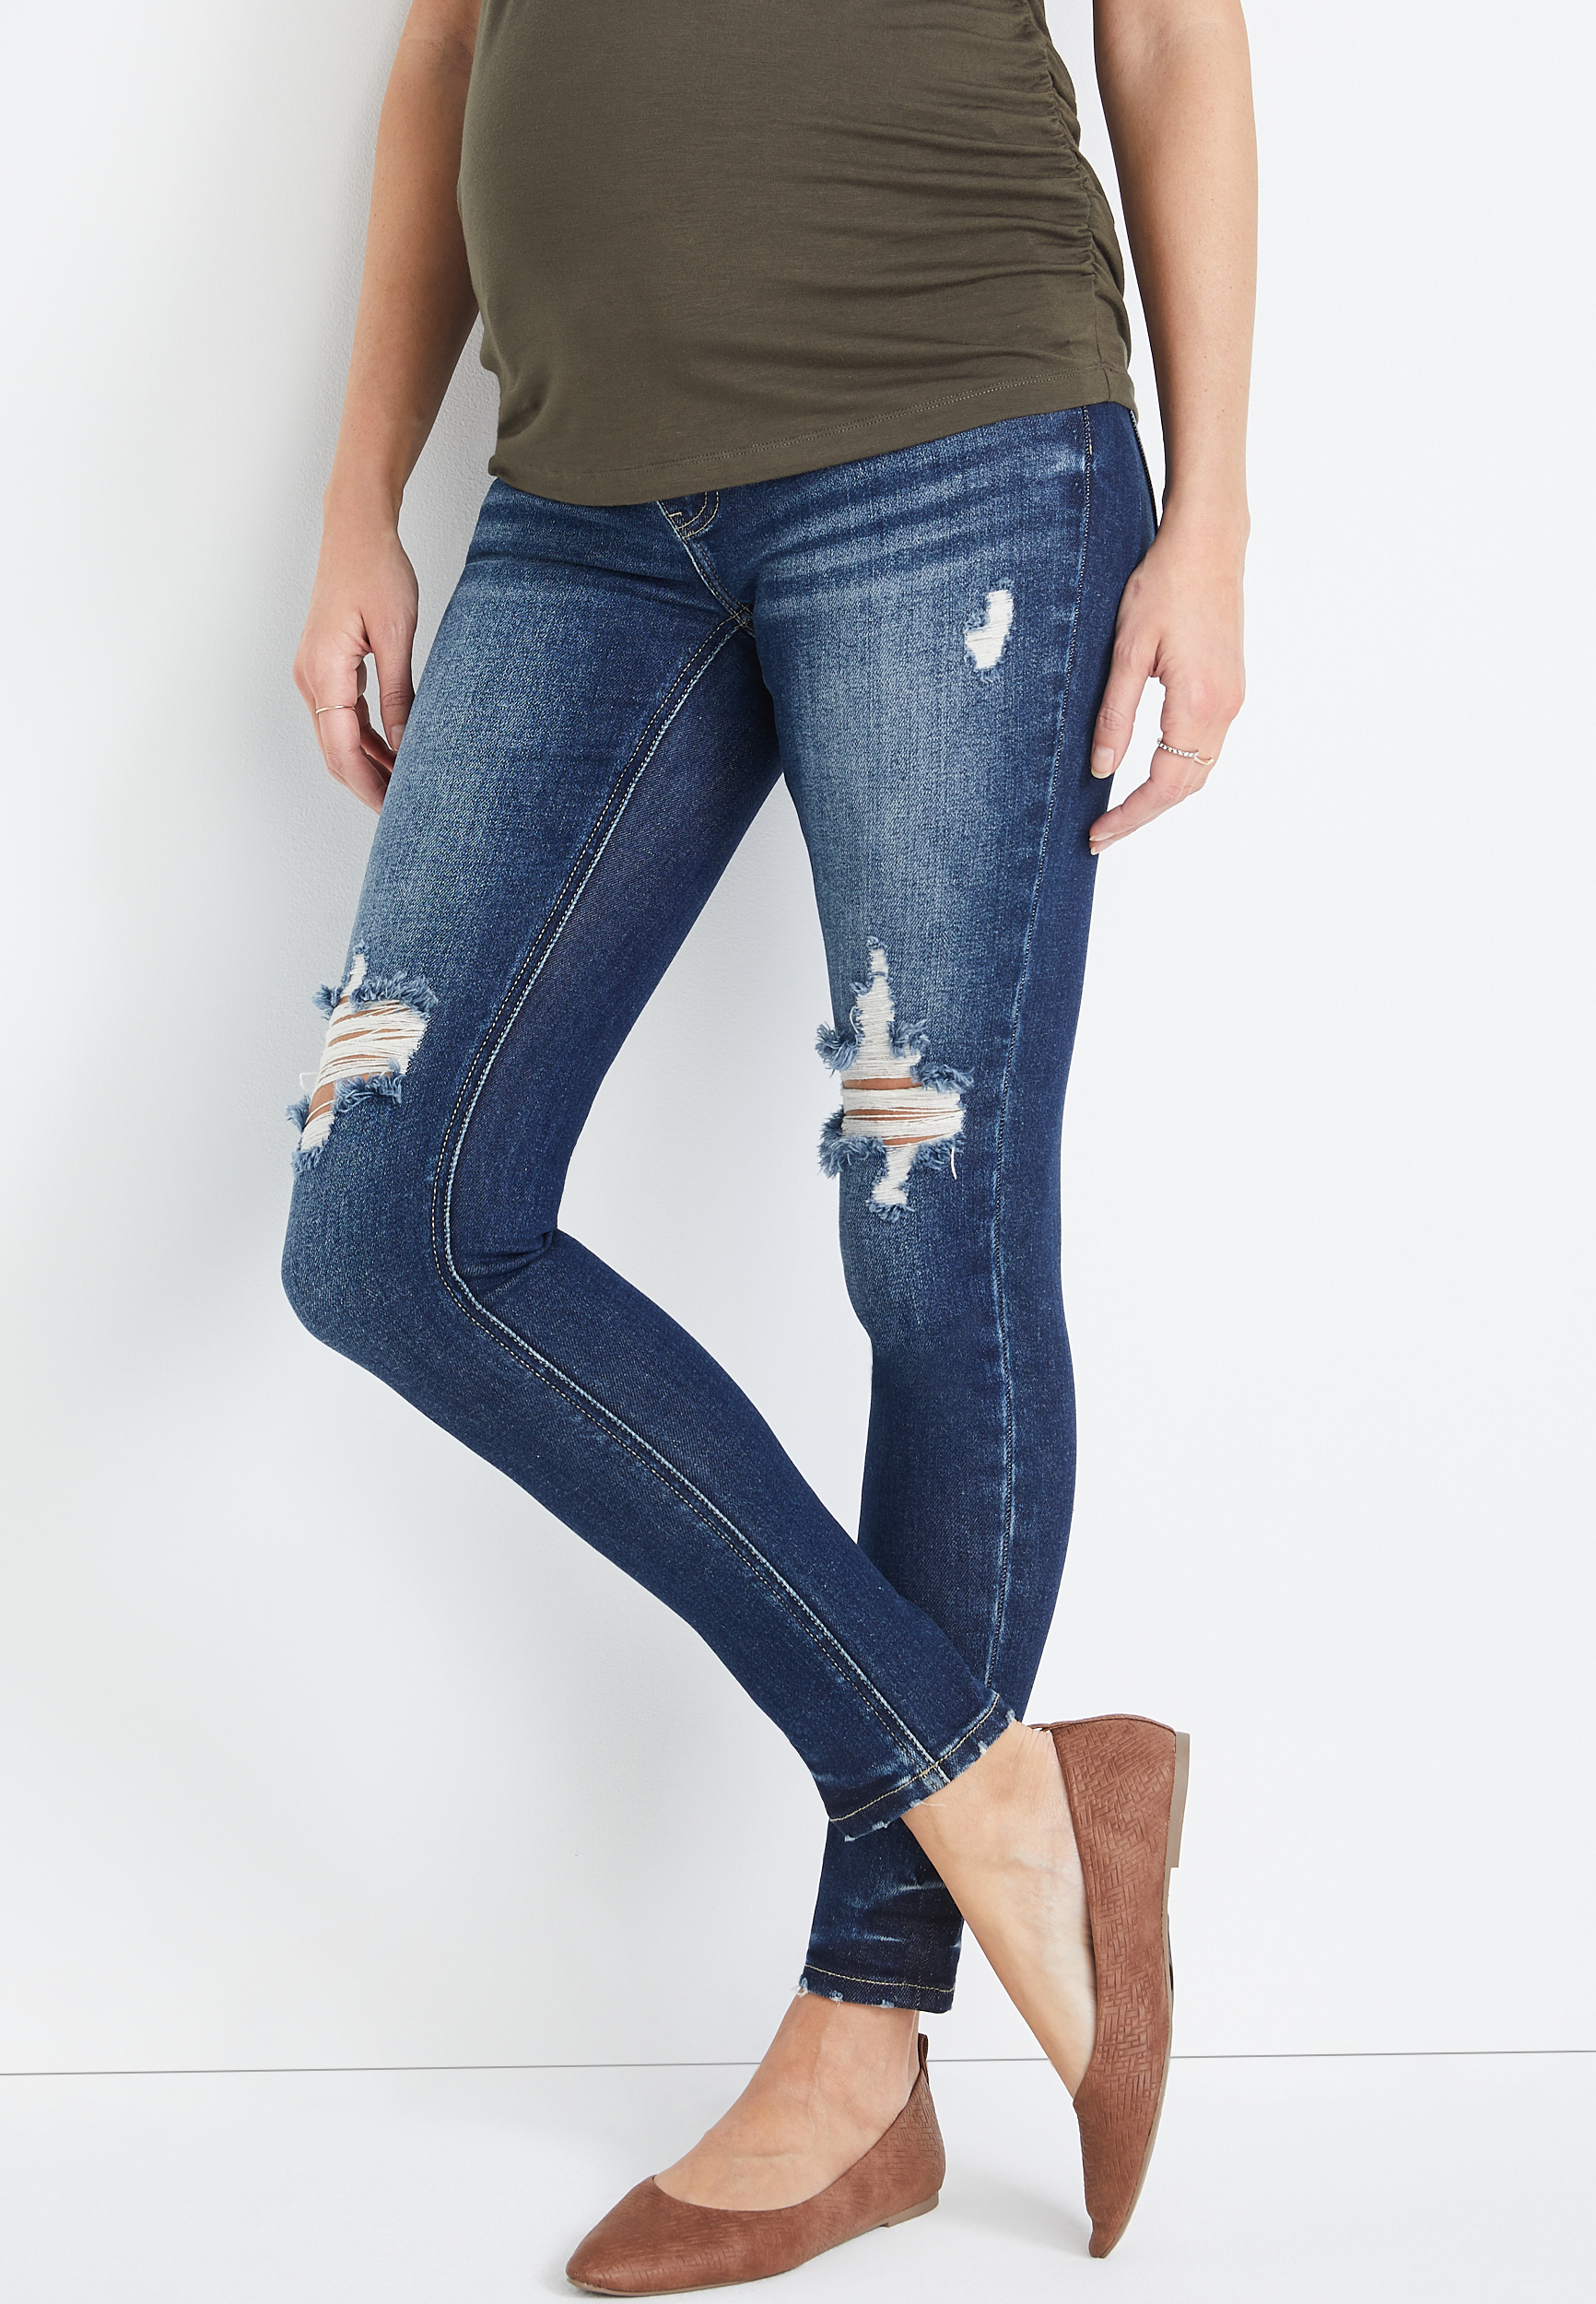 Inficere Tidlig radiator KanCan™ Skinny Side Panel Ripped Maternity Jean | maurices